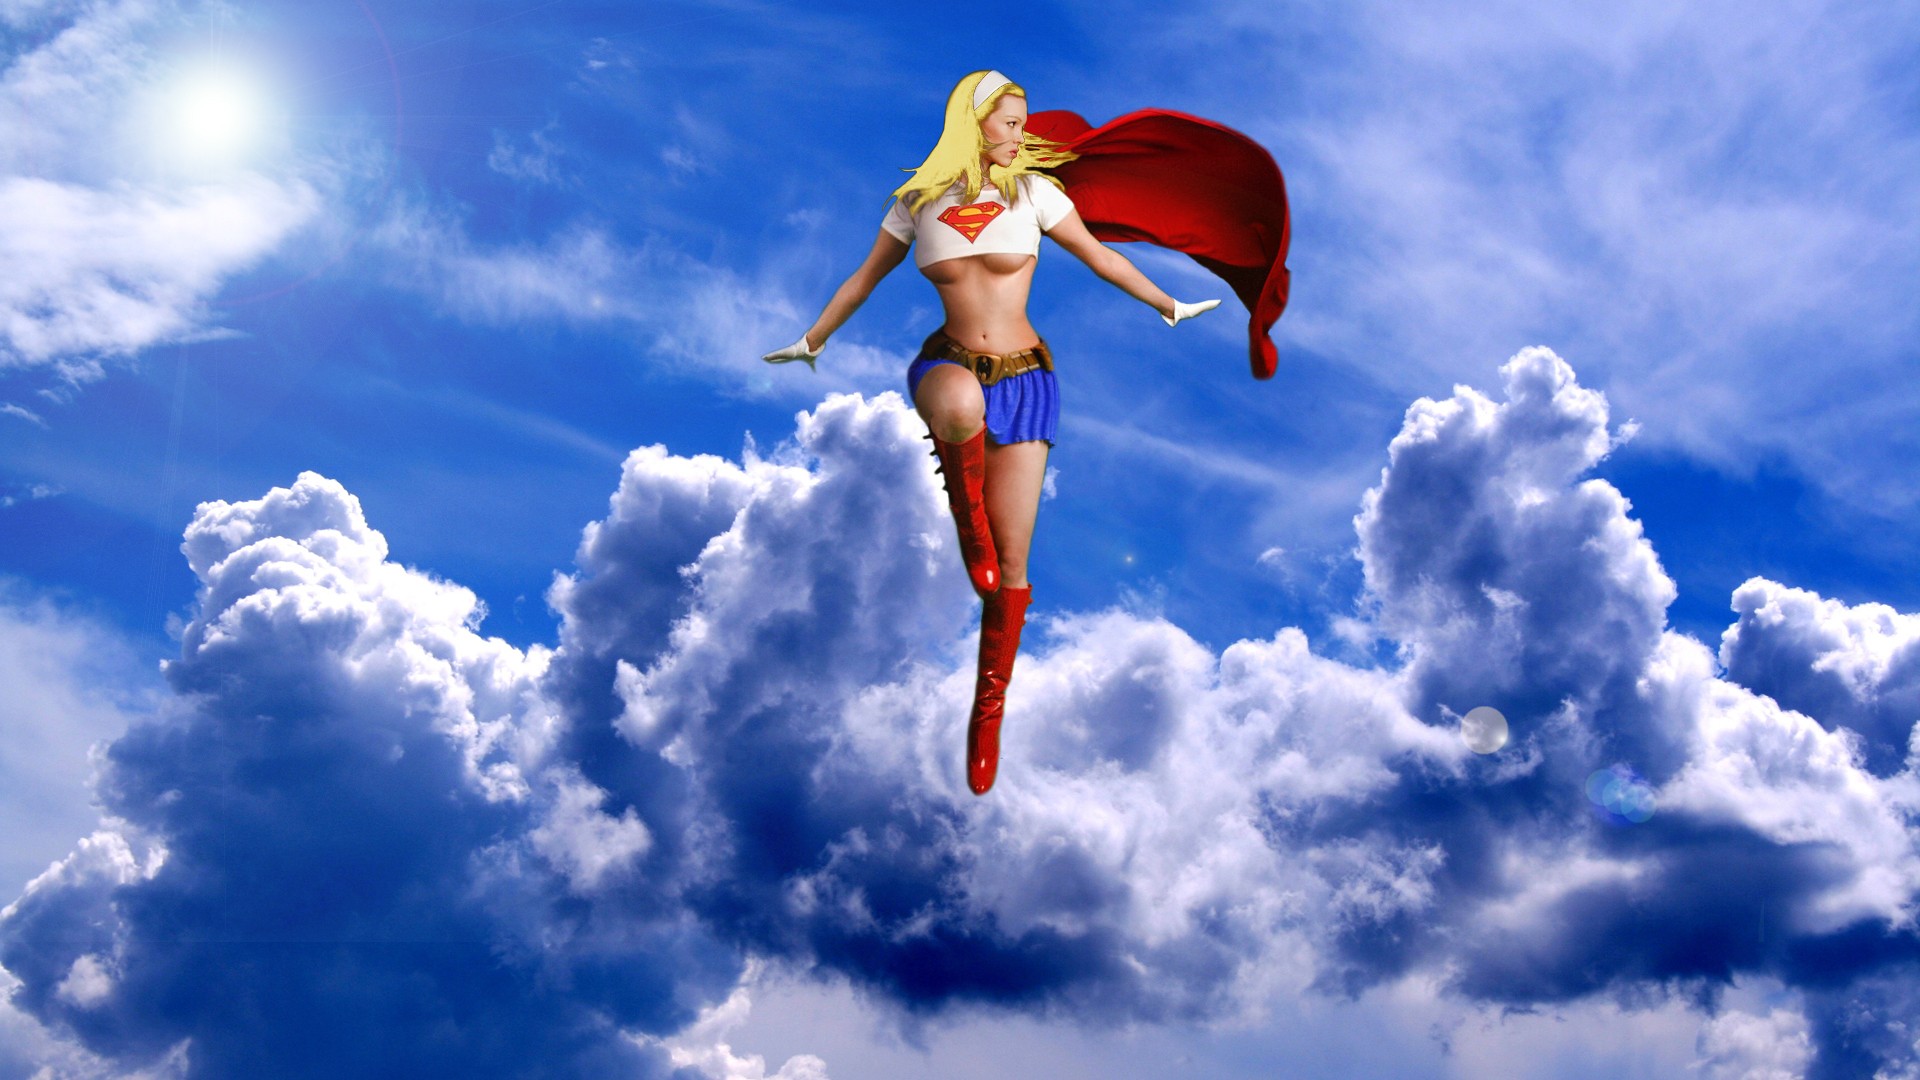 Supergirl Flying In The Sky - HD Wallpaper 